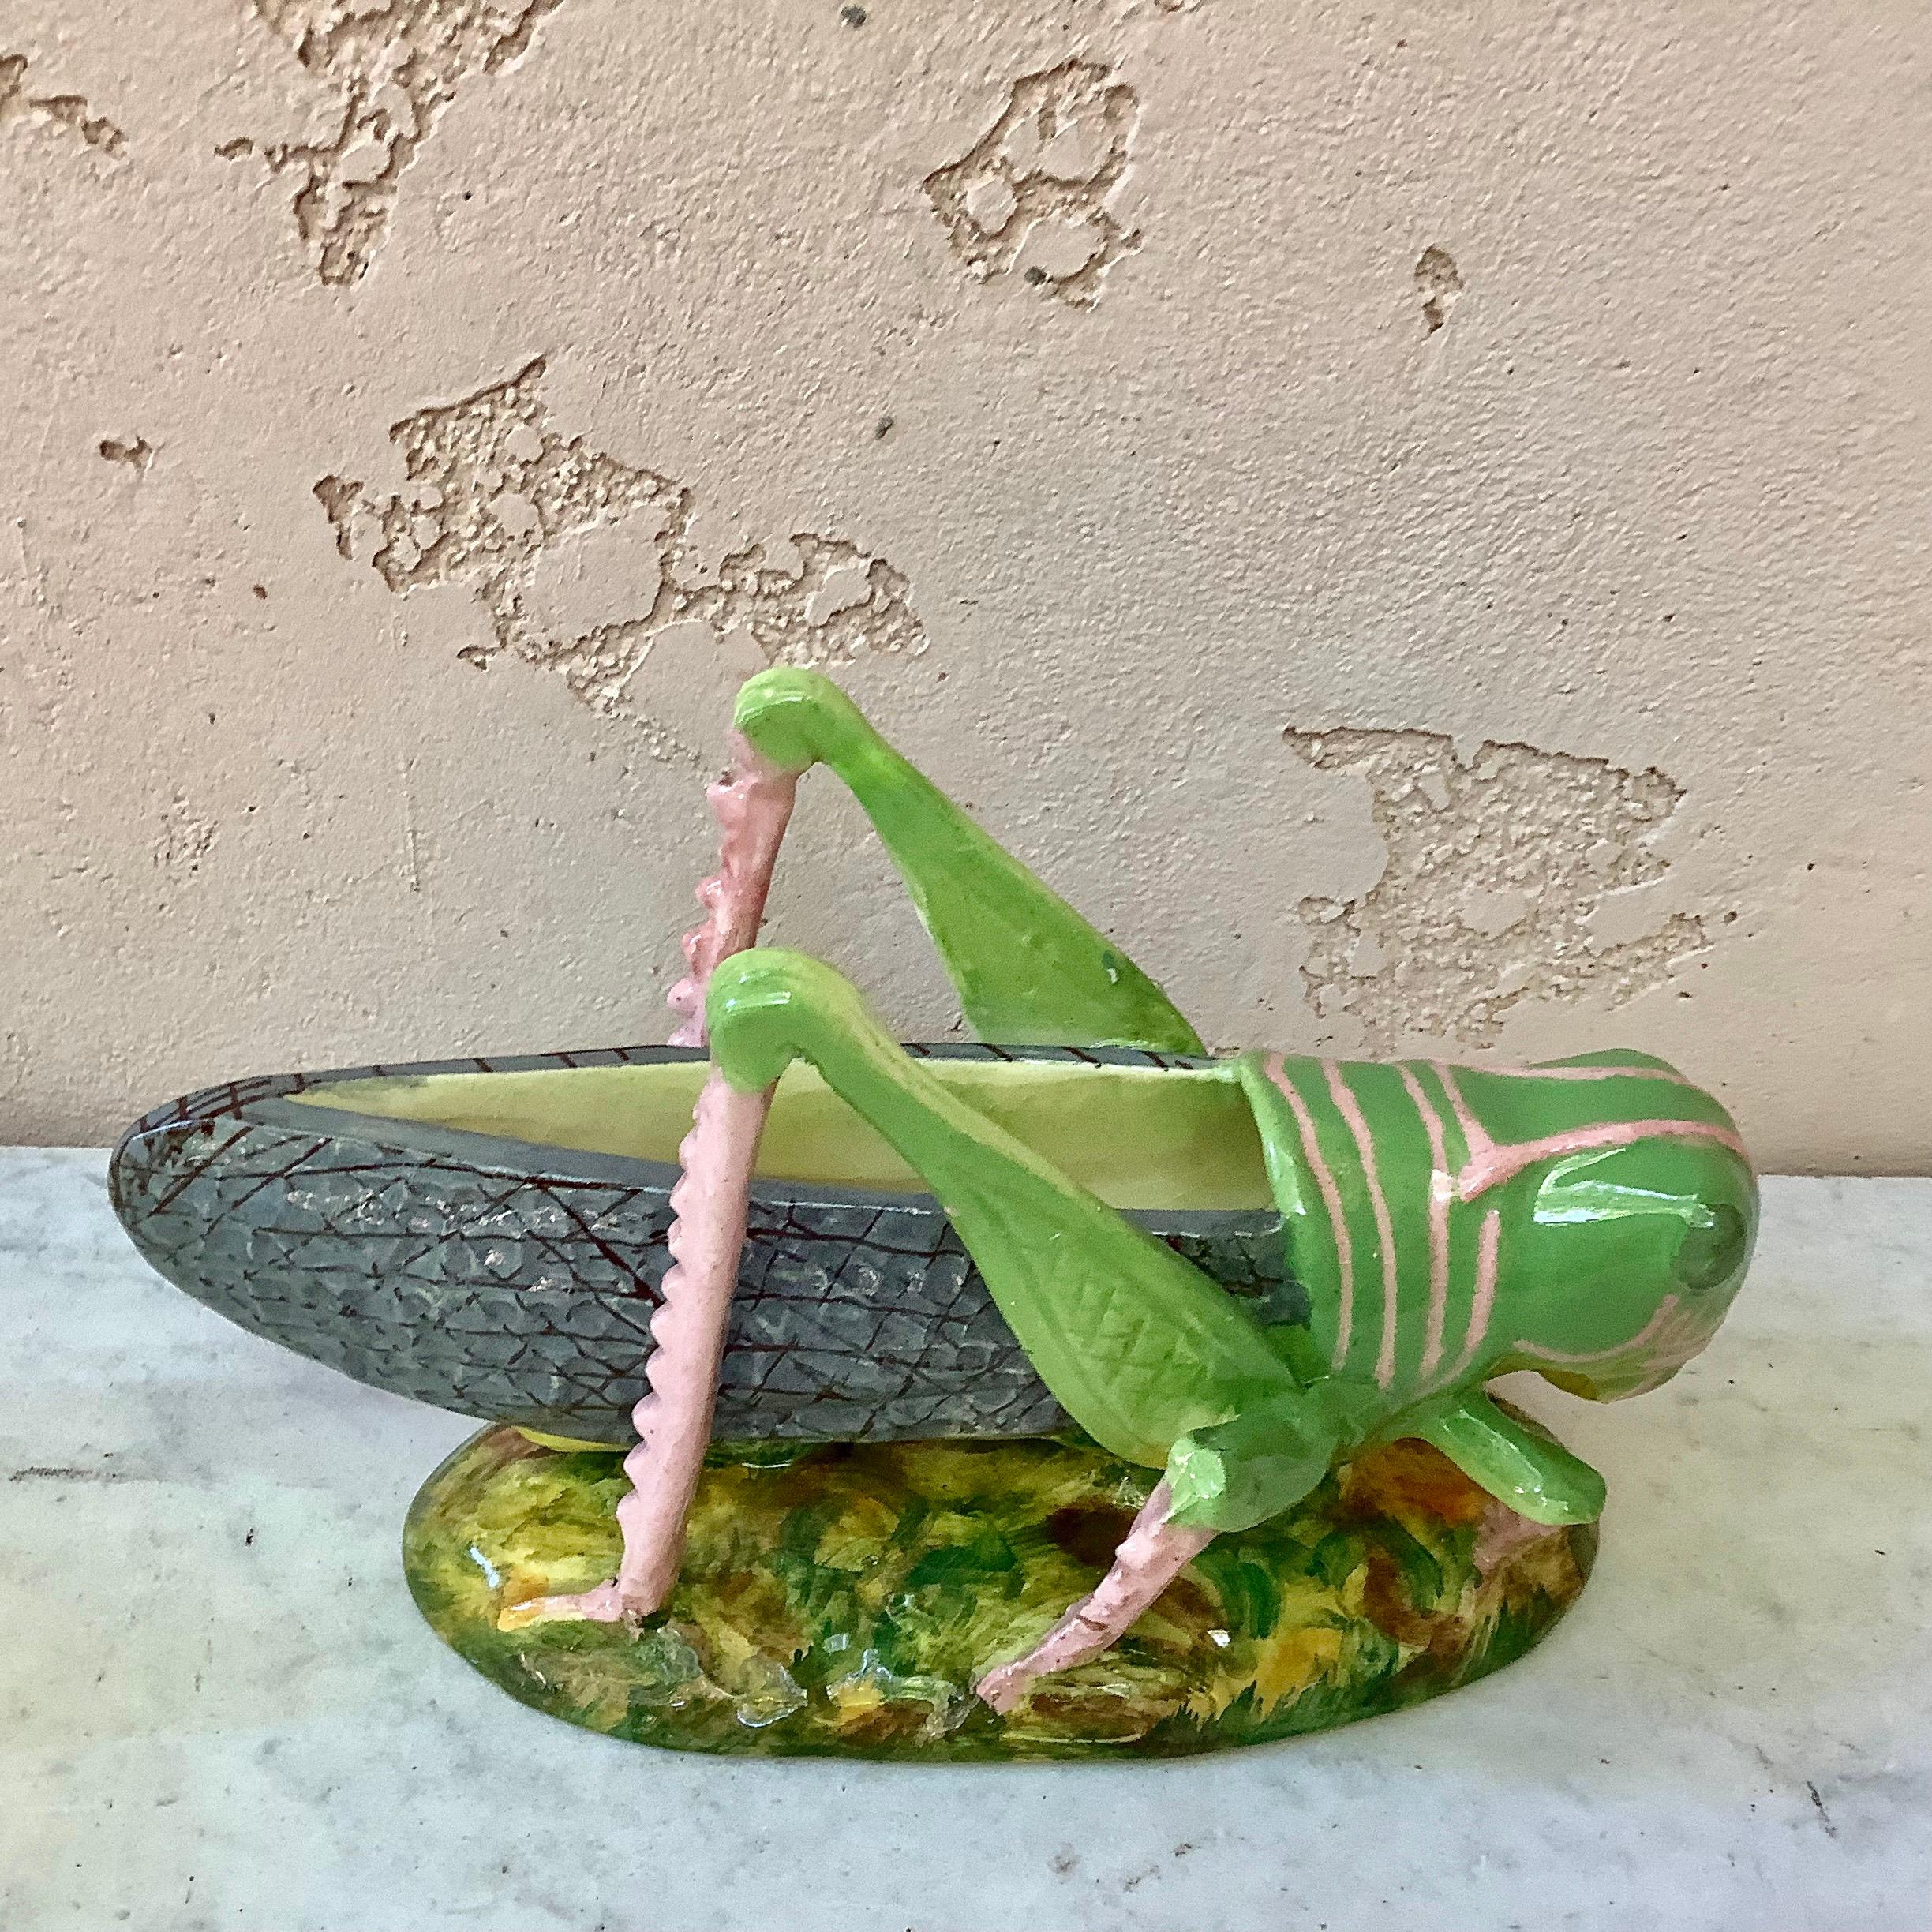 Rare Majolica grasshopper jardinière attributed Jerome Massier Fils, circa 1890.
At the end of 19th century The Massier manufacture participated at the Universal Exhibitions and earned several prices. This piece is a good example of the French Art